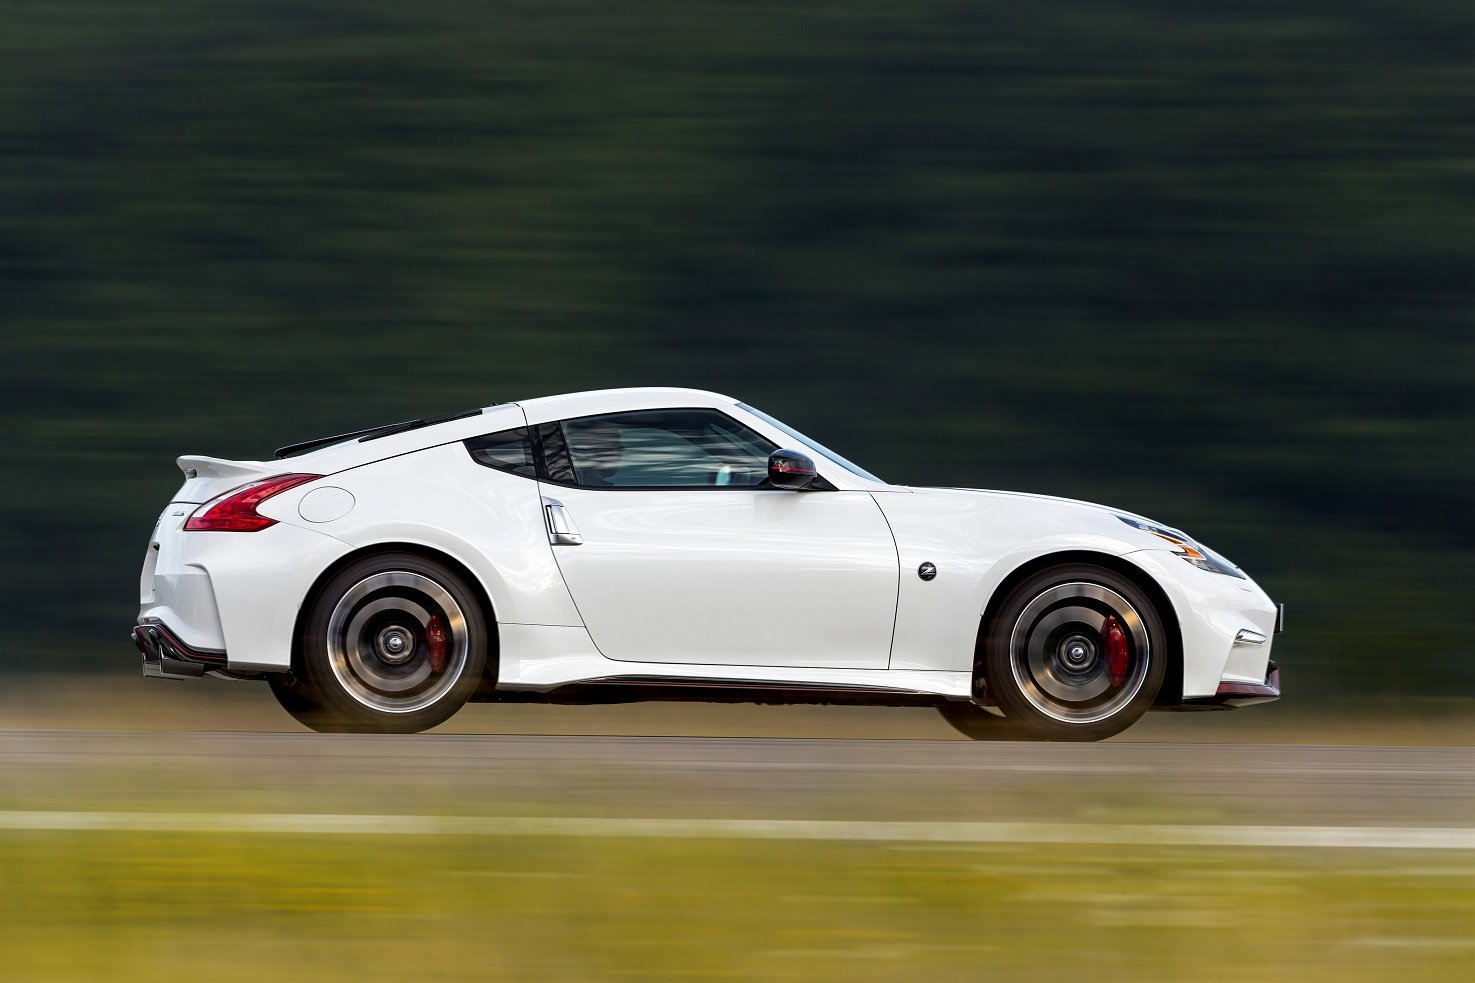 nissan, 370z, Nismo, Coupe, Cars, 2014 Wallpaper